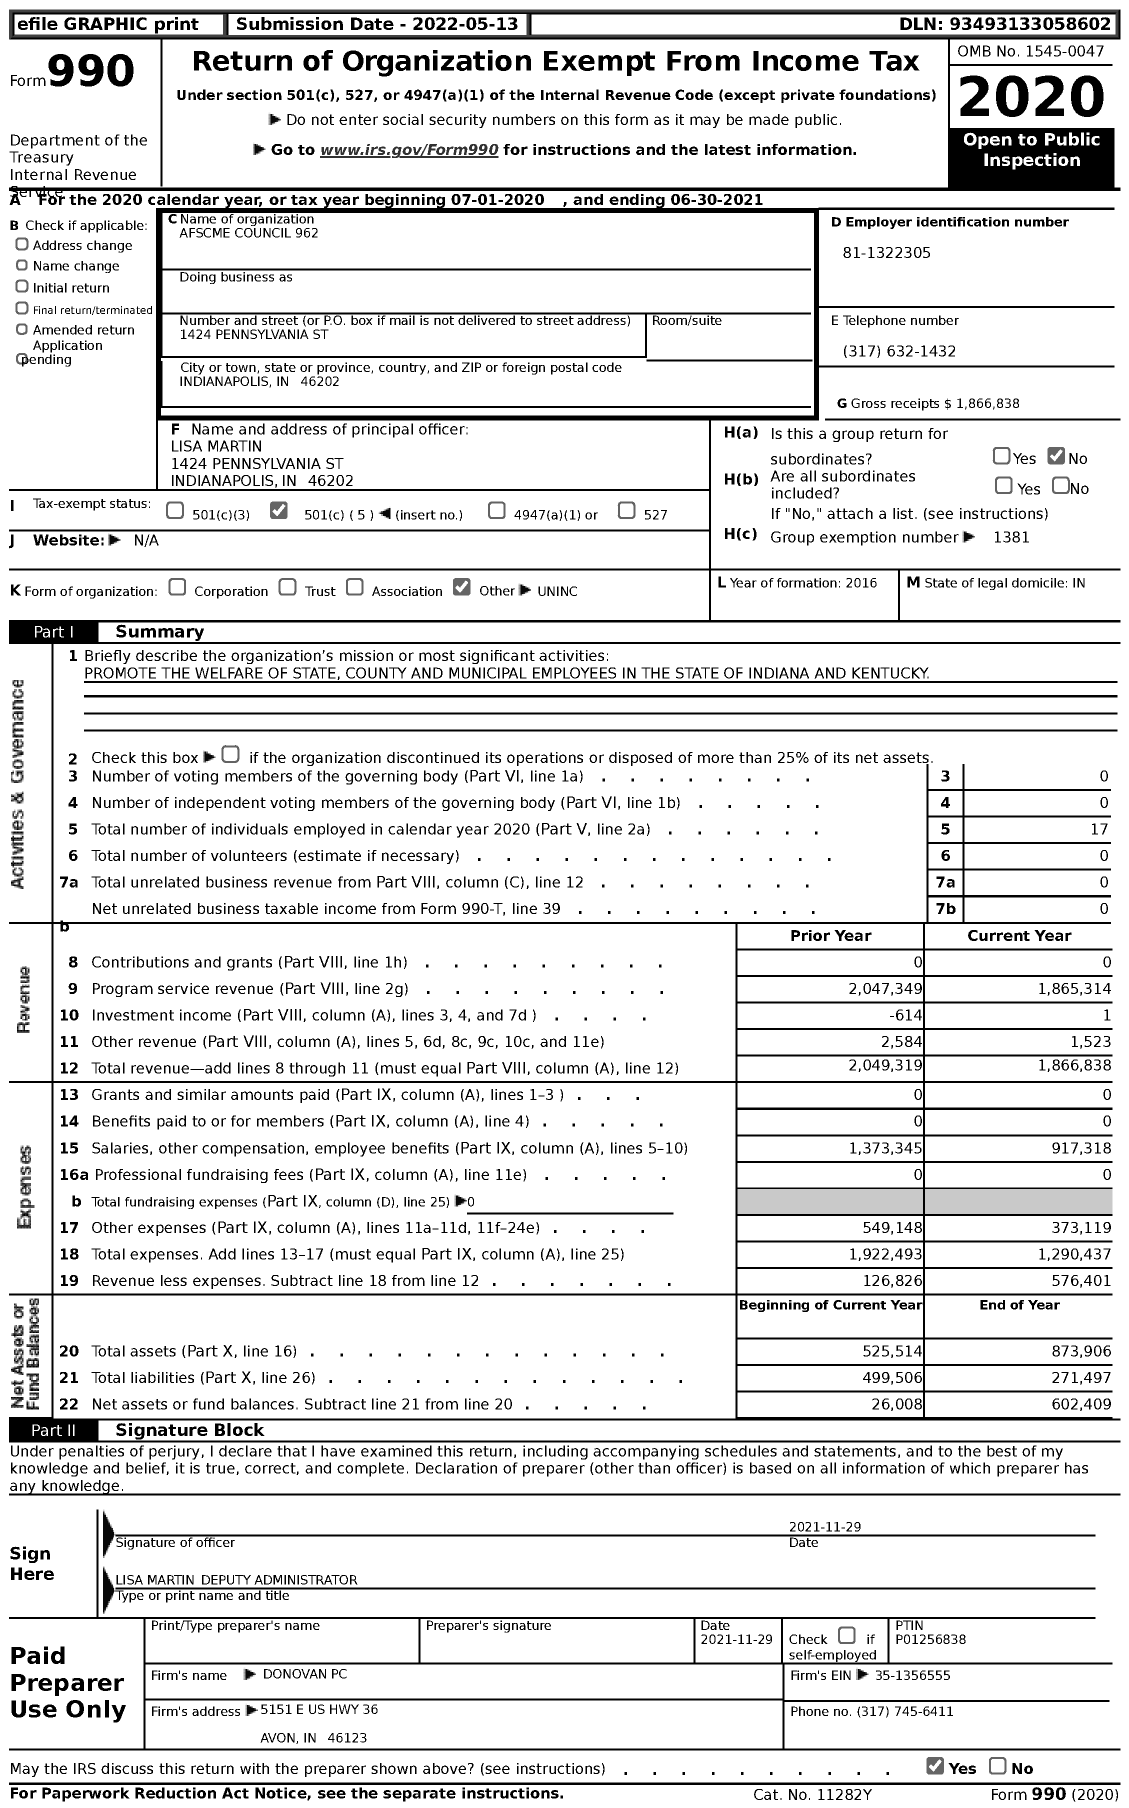 Image of first page of 2020 Form 990 for American Federation of State County & Municipal Employees - C0962in AFSCME Council 962